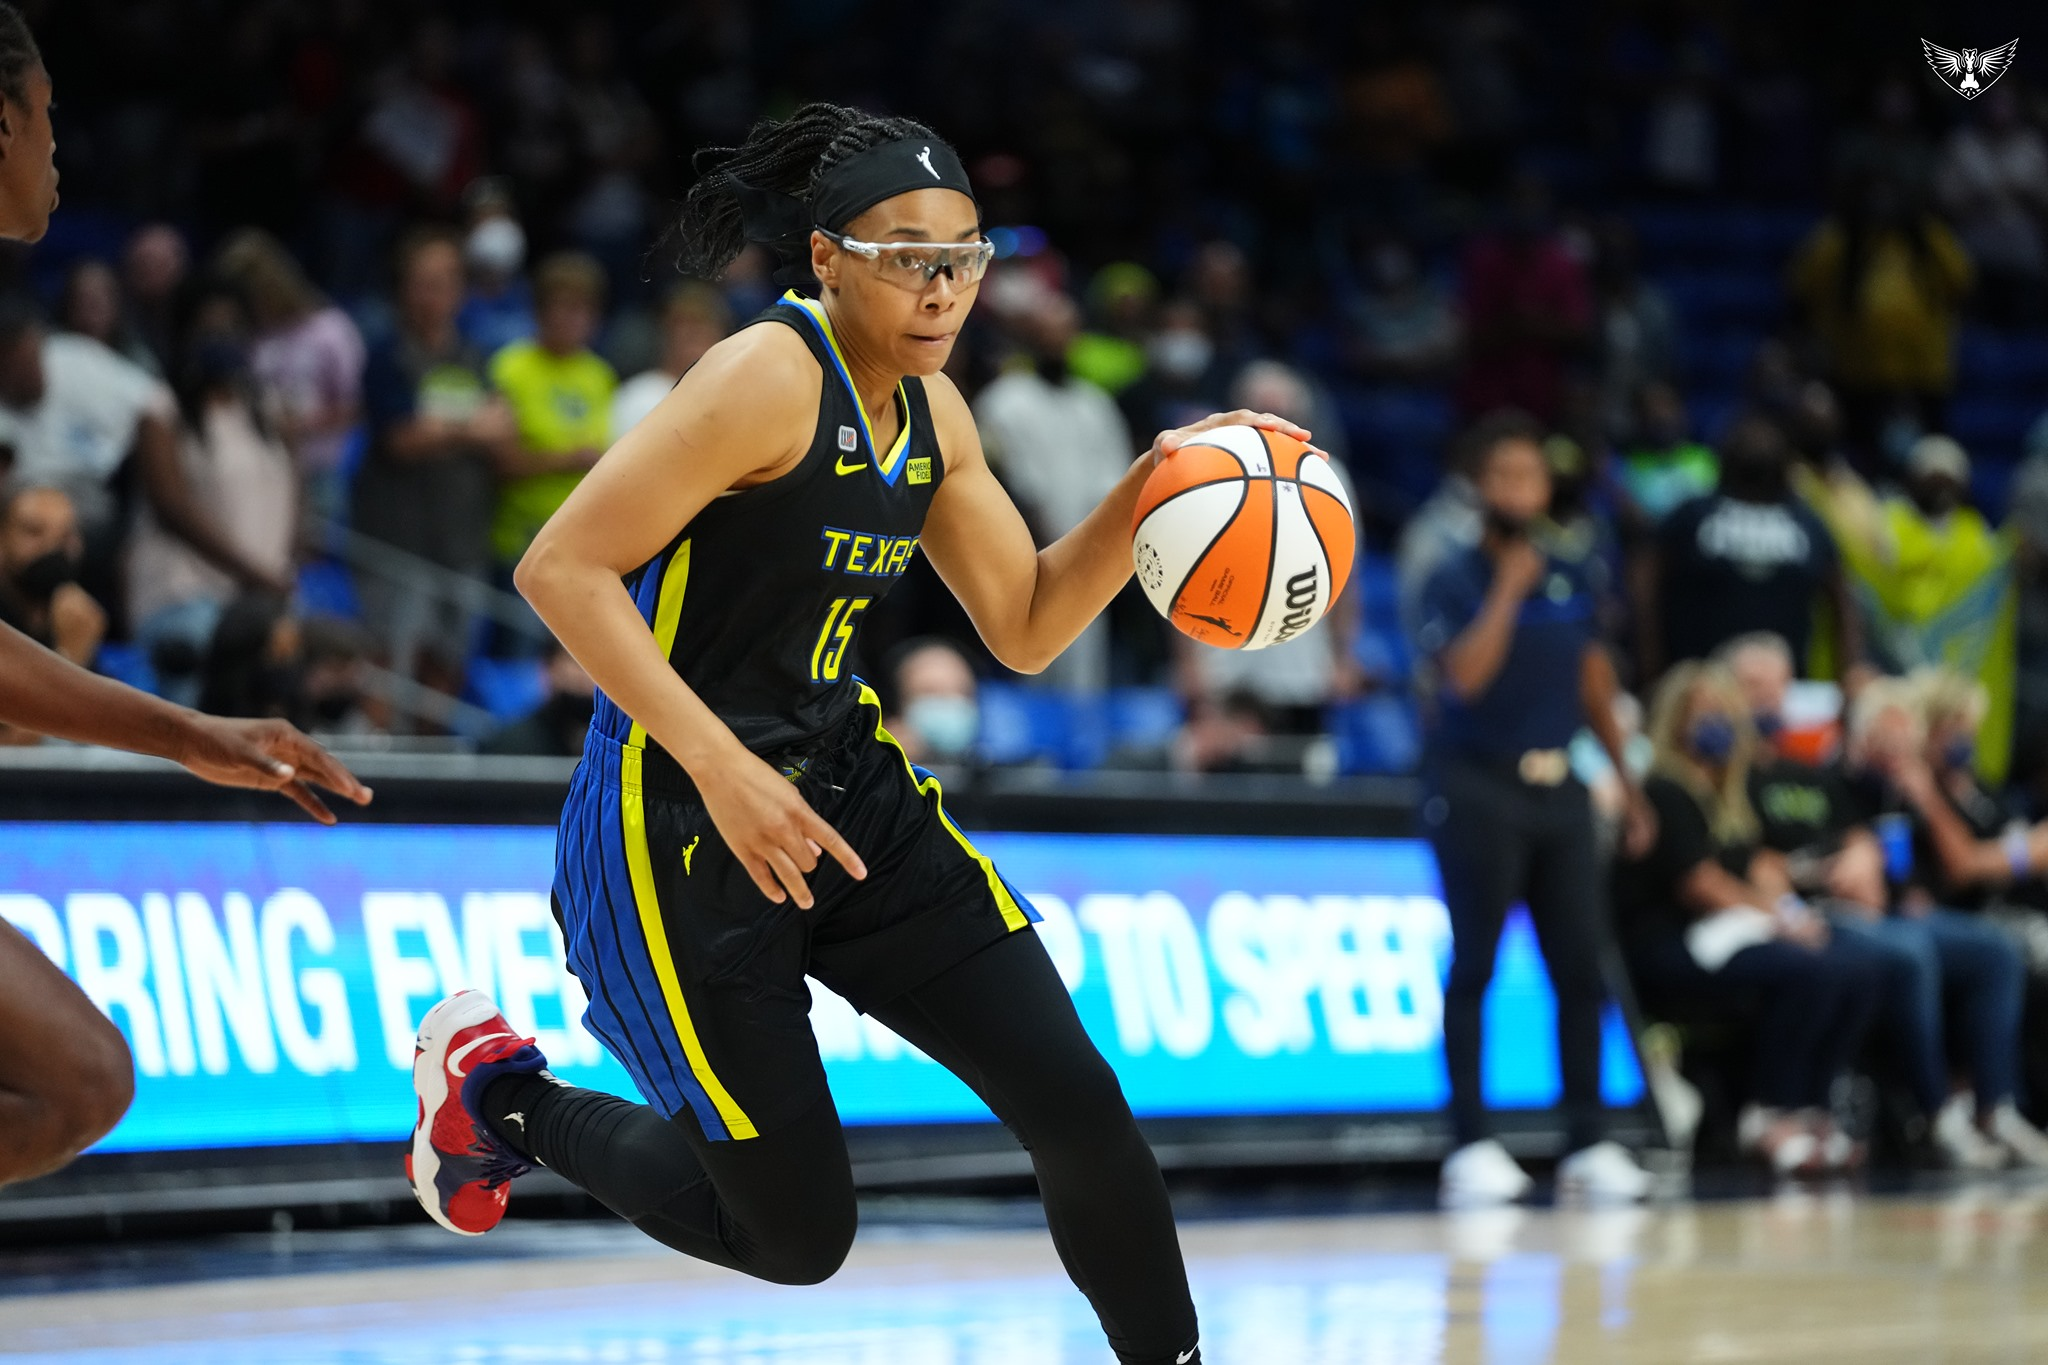 WNBA: Wings closes out Liberty, Sun wins twelfth straight